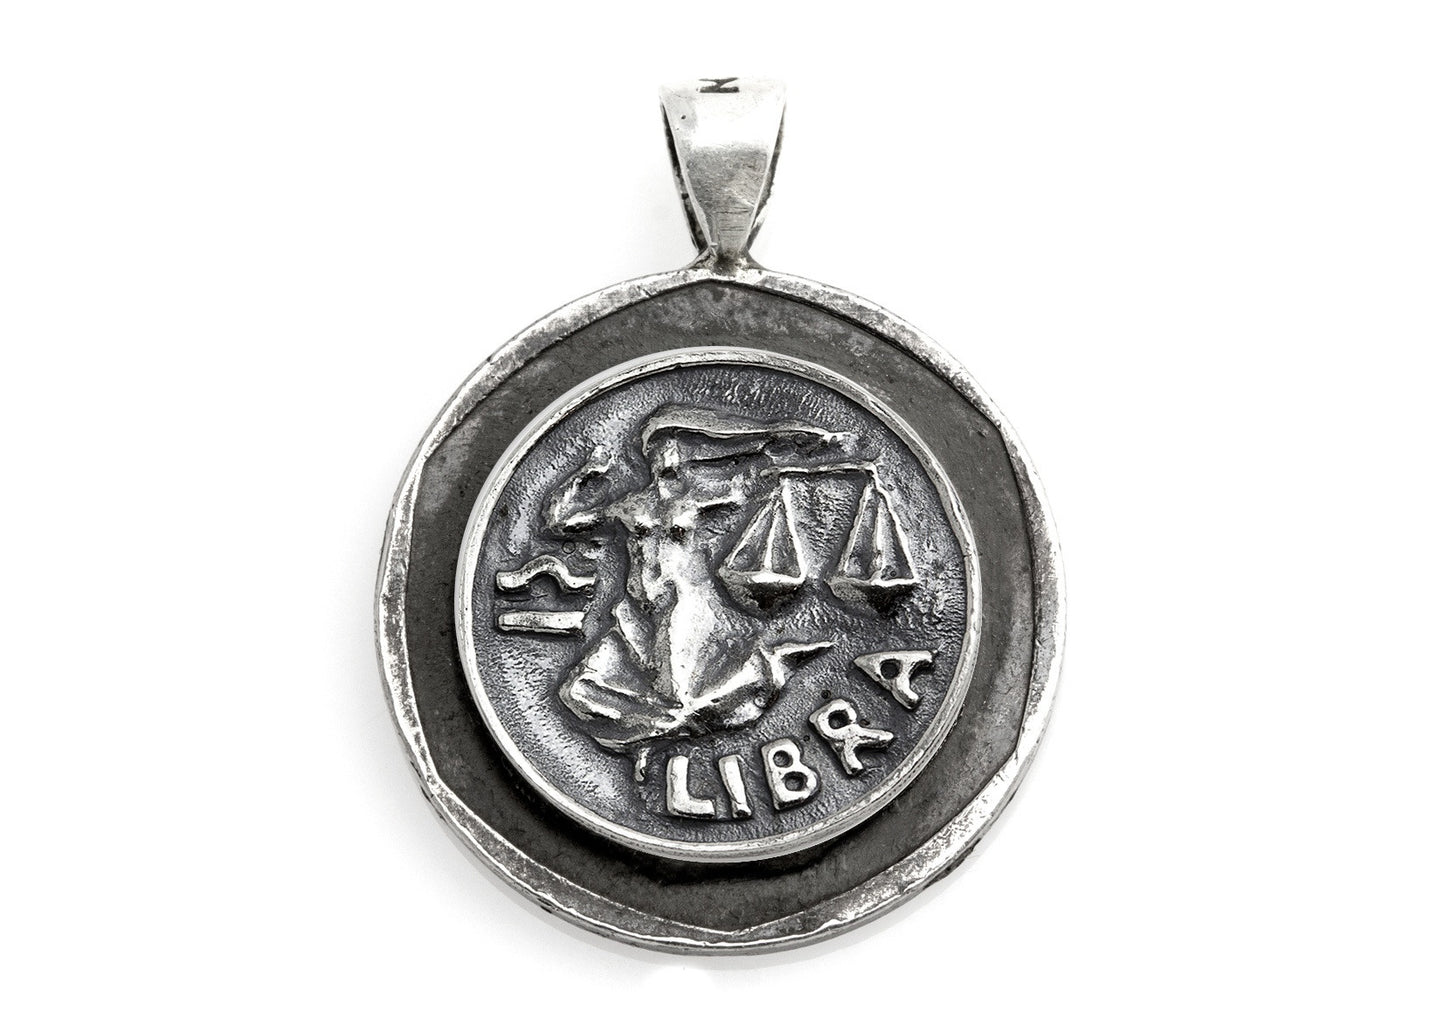 Libra Sign Astrology Zodiac Medallion on Old 10 Sheqel Coin of Israel